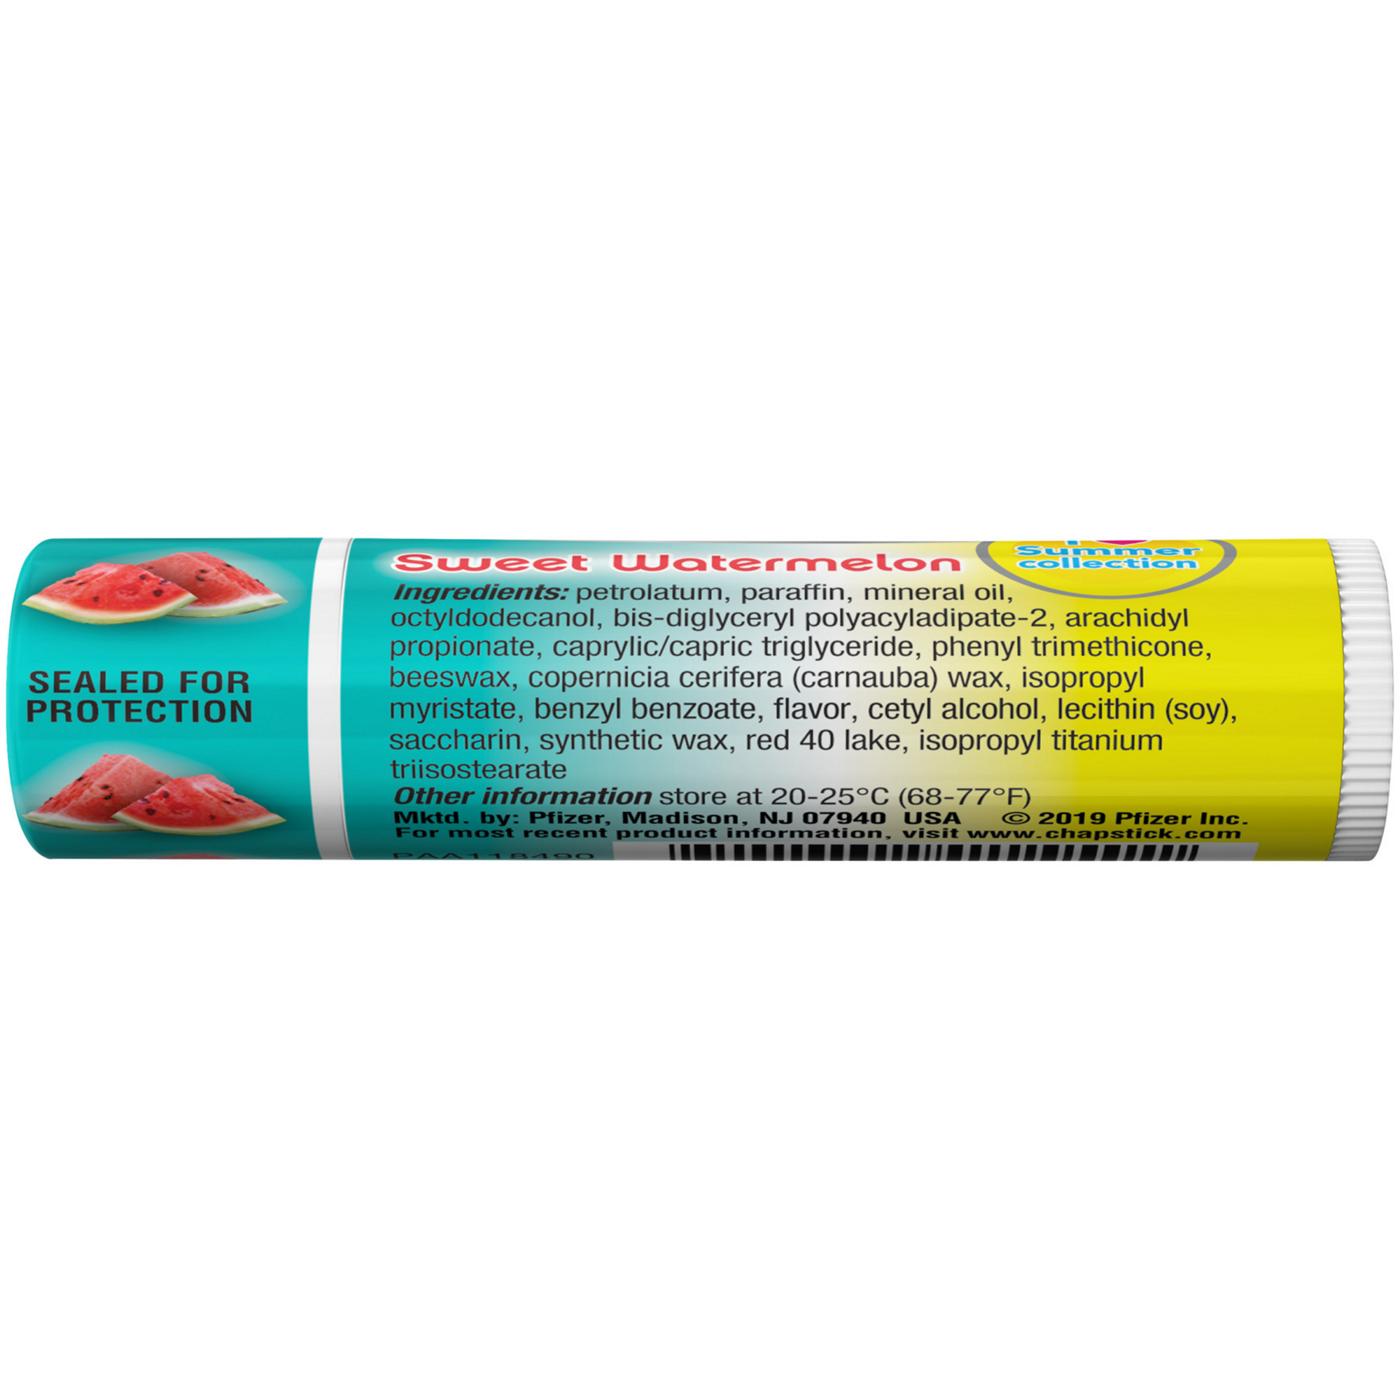 Chapstick Candy Cane Peppermint Lip Balm Tube; image 4 of 5